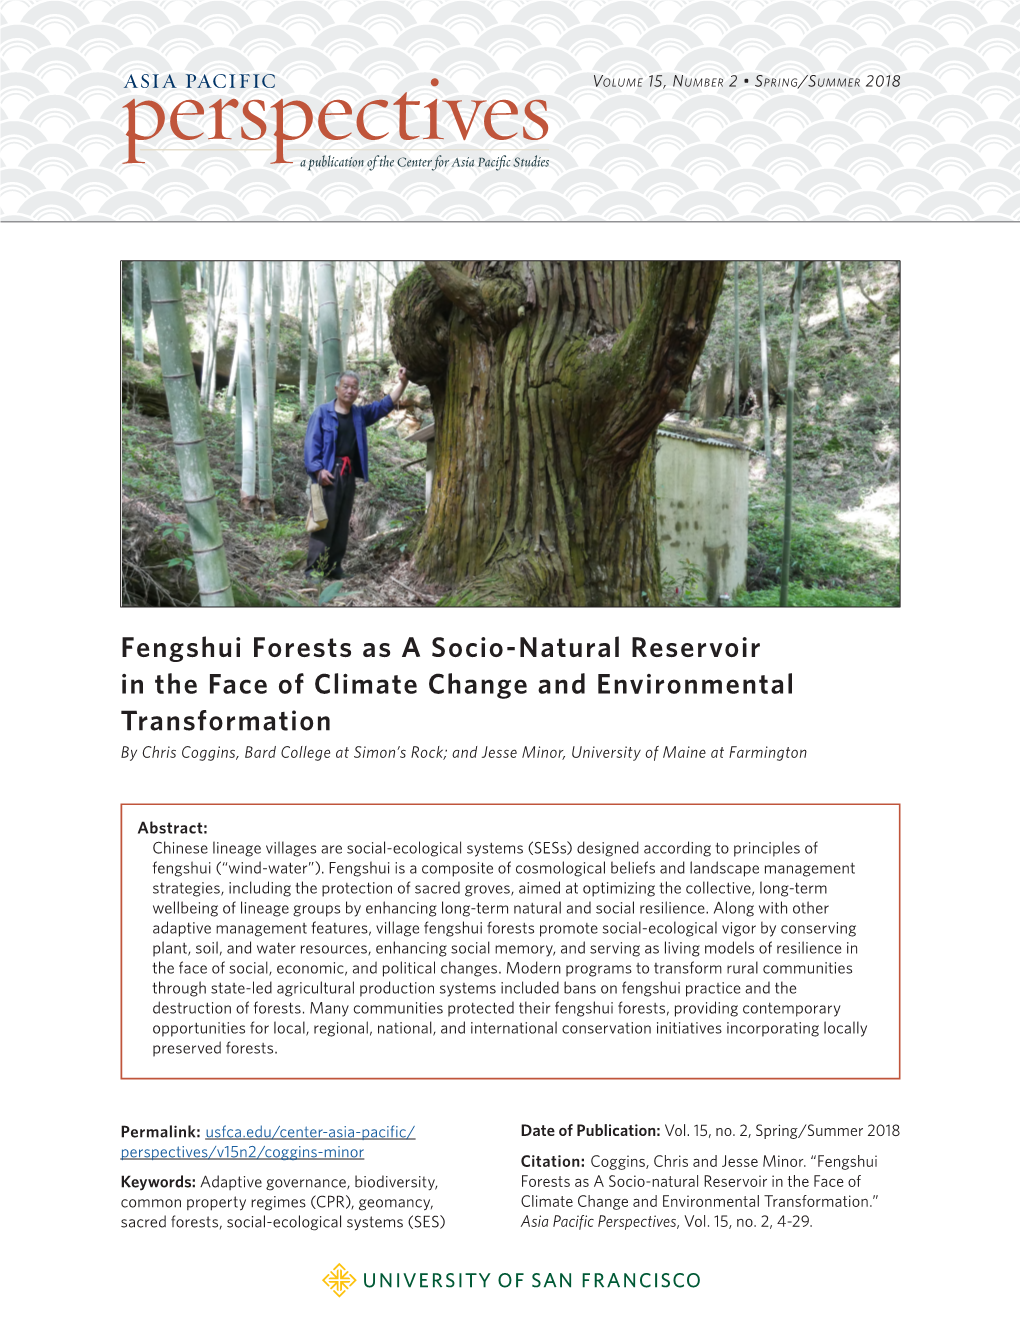 Fengshui Forests As a Socio-Natural Reservoir in the Face of Climate